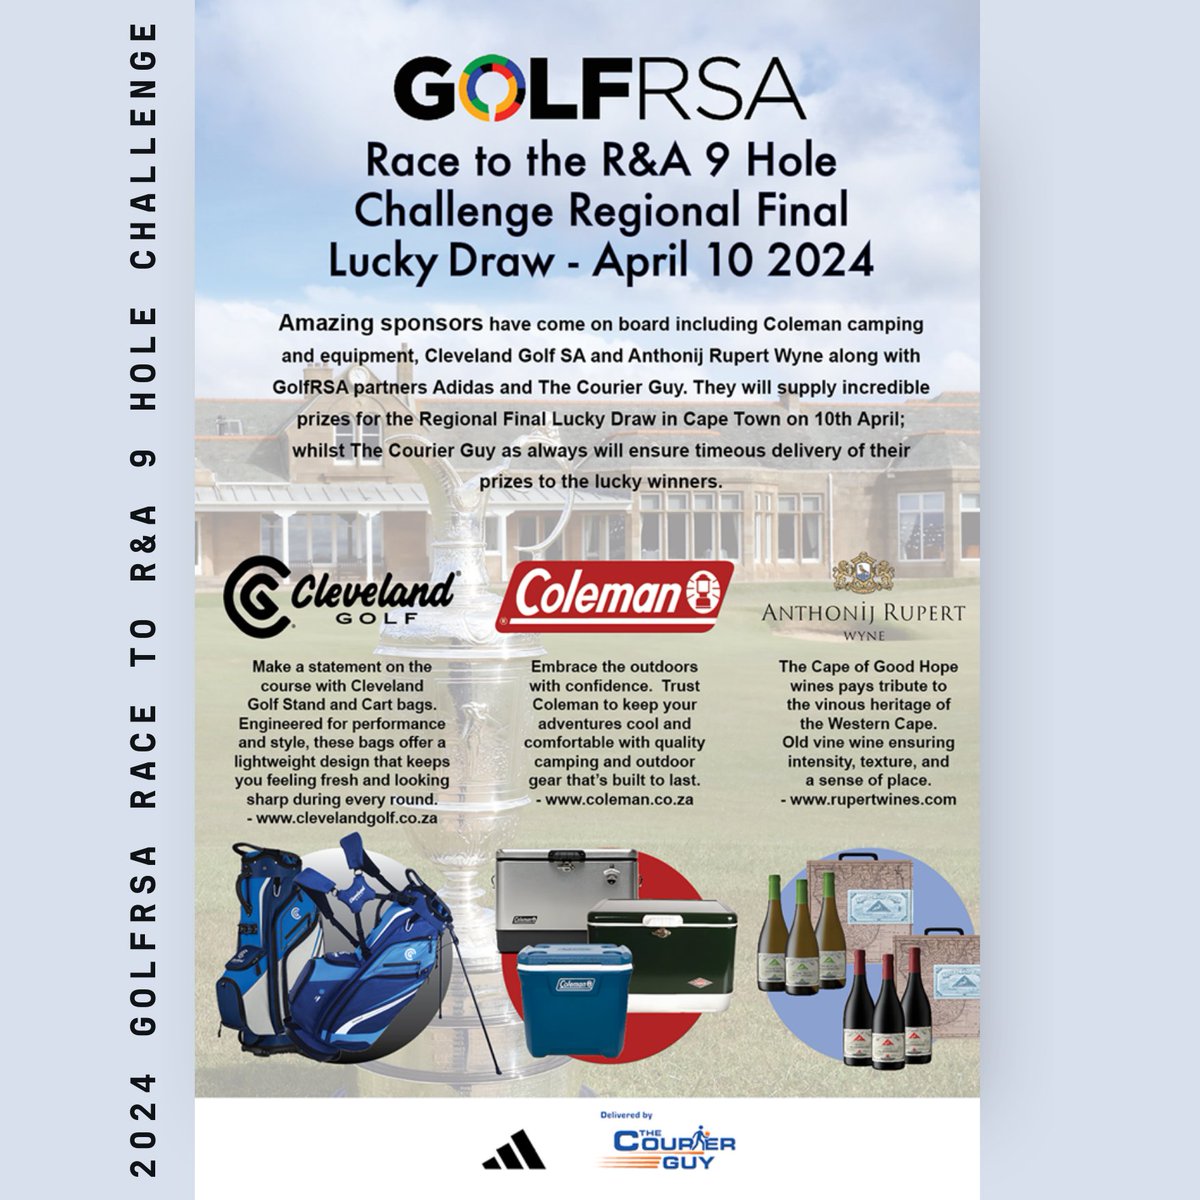 #Countdown
Just 7 days until our Regional Final Lucky Draw of the 2024 GolfRSA Race to the R&A 9 Hole Challenge - stay tuned for news of the lucky prize winners AND our National Finalists!!

#golfrsa #itstartshere #growgolf